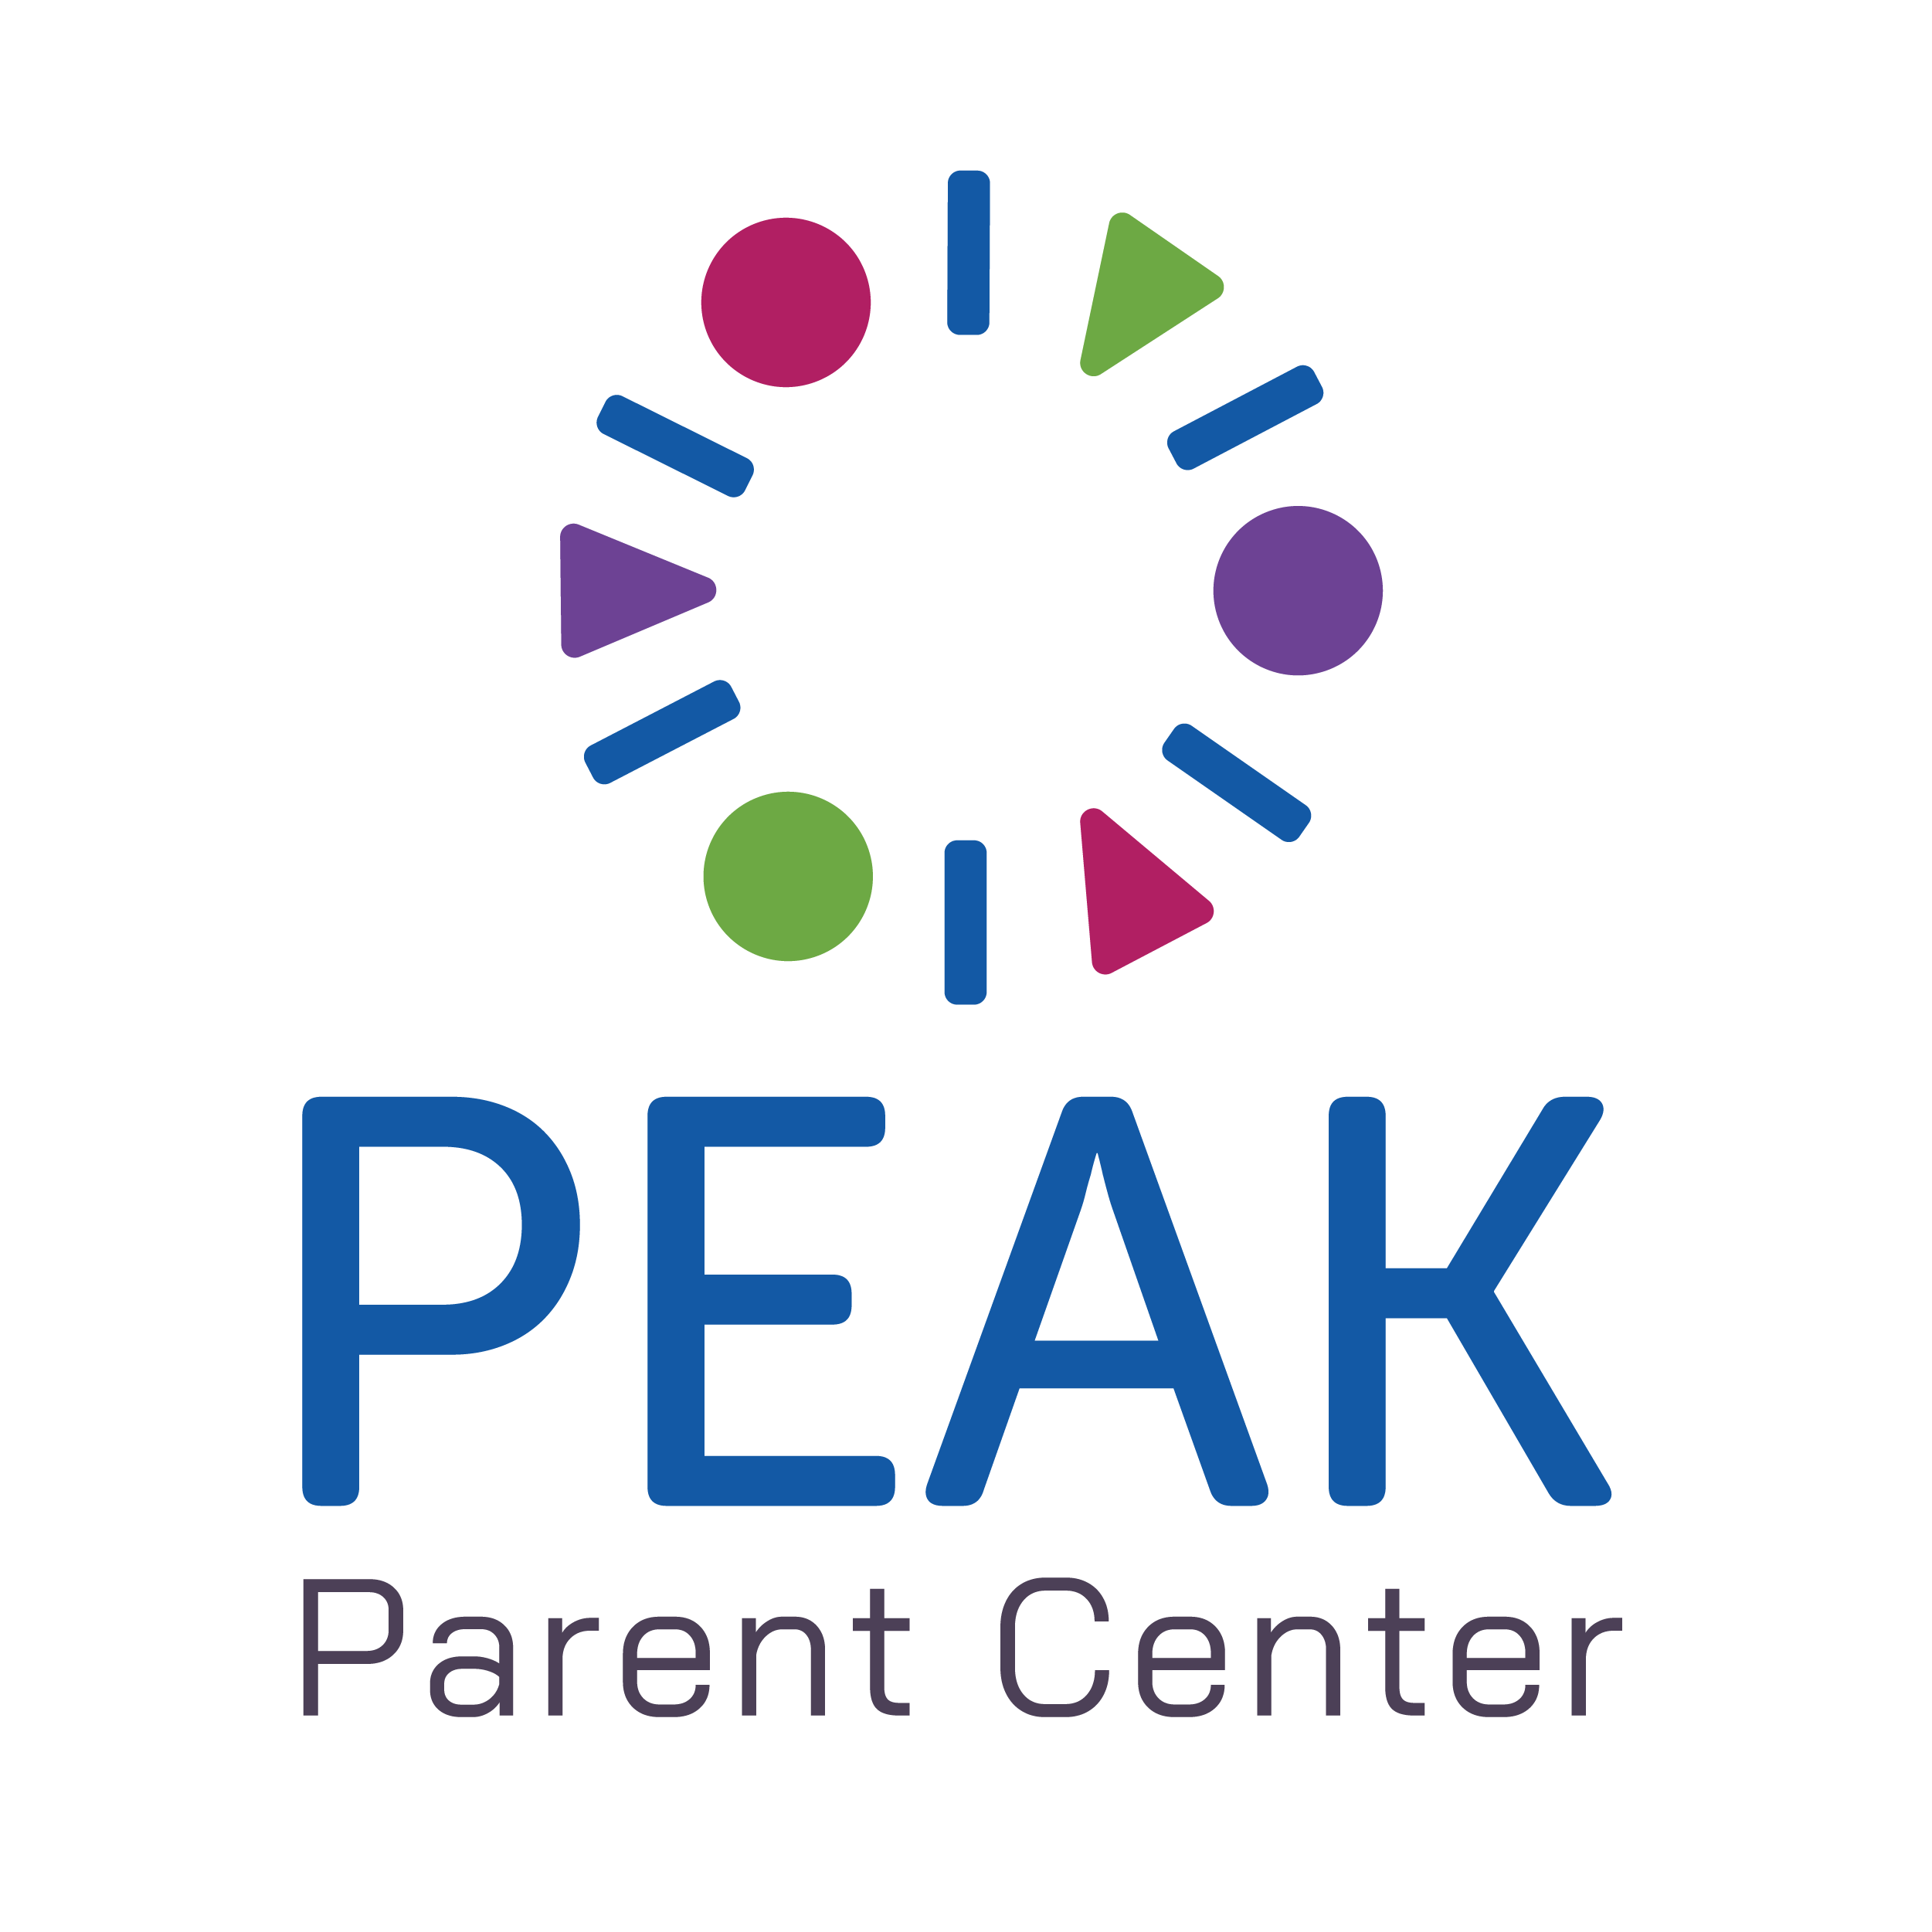 PEAK Parent Center logo design by logo designer Neon Pig Creative for your inspiration and for the worlds largest logo competition